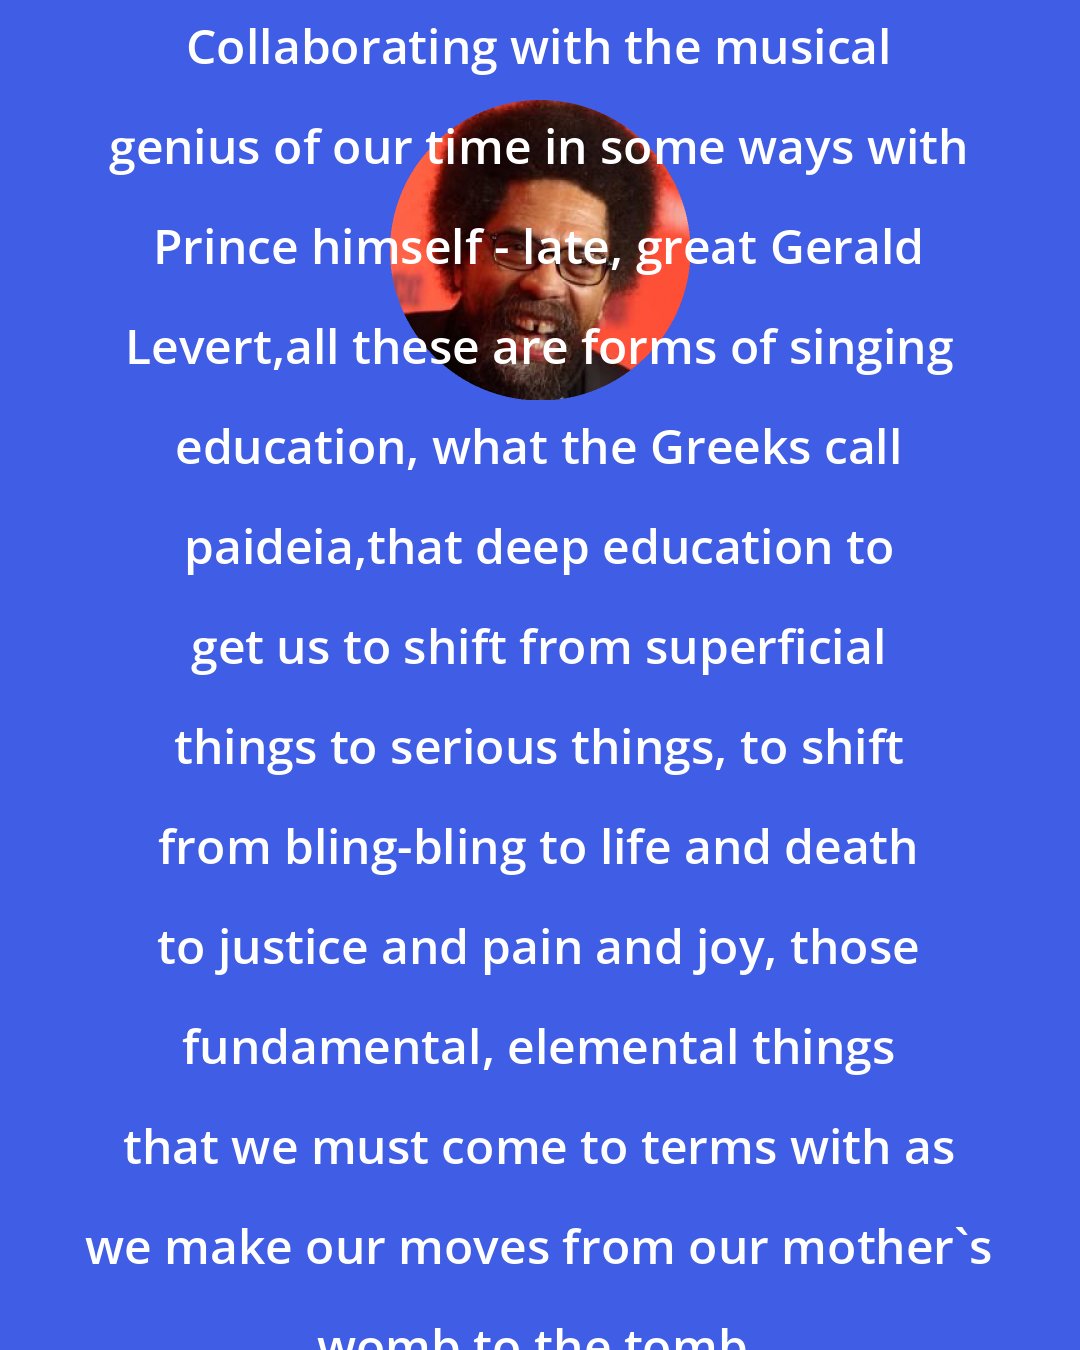 Cornel West: Collaborating with the musical genius of our time in some ways with Prince himself - late, great Gerald Levert,all these are forms of singing education, what the Greeks call paideia,that deep education to get us to shift from superficial things to serious things, to shift from bling-bling to life and death to justice and pain and joy, those fundamental, elemental things that we must come to terms with as we make our moves from our mother's womb to the tomb.